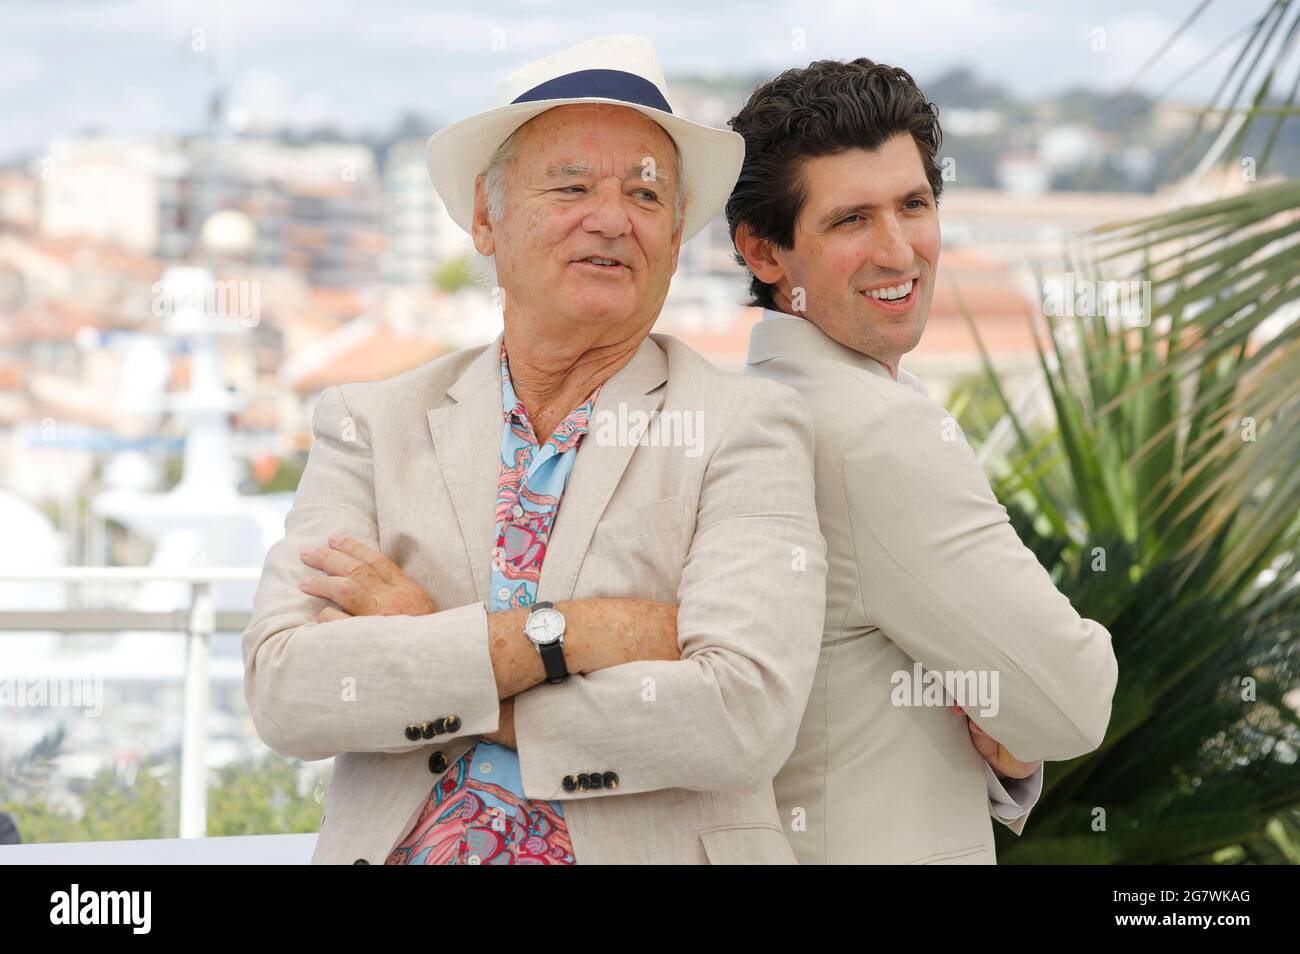 Cannes, France. 16th July, 2021. Bill Murray and Andrew Muscato attending the 'New Worlds: The Cradle Of Civilization' photocall during the 74th annual Cannes Film Festival on July 16, 2021 in Cannes, France. Credit: Geisler-Fotopress GmbH/Alamy Live News Stock Photo